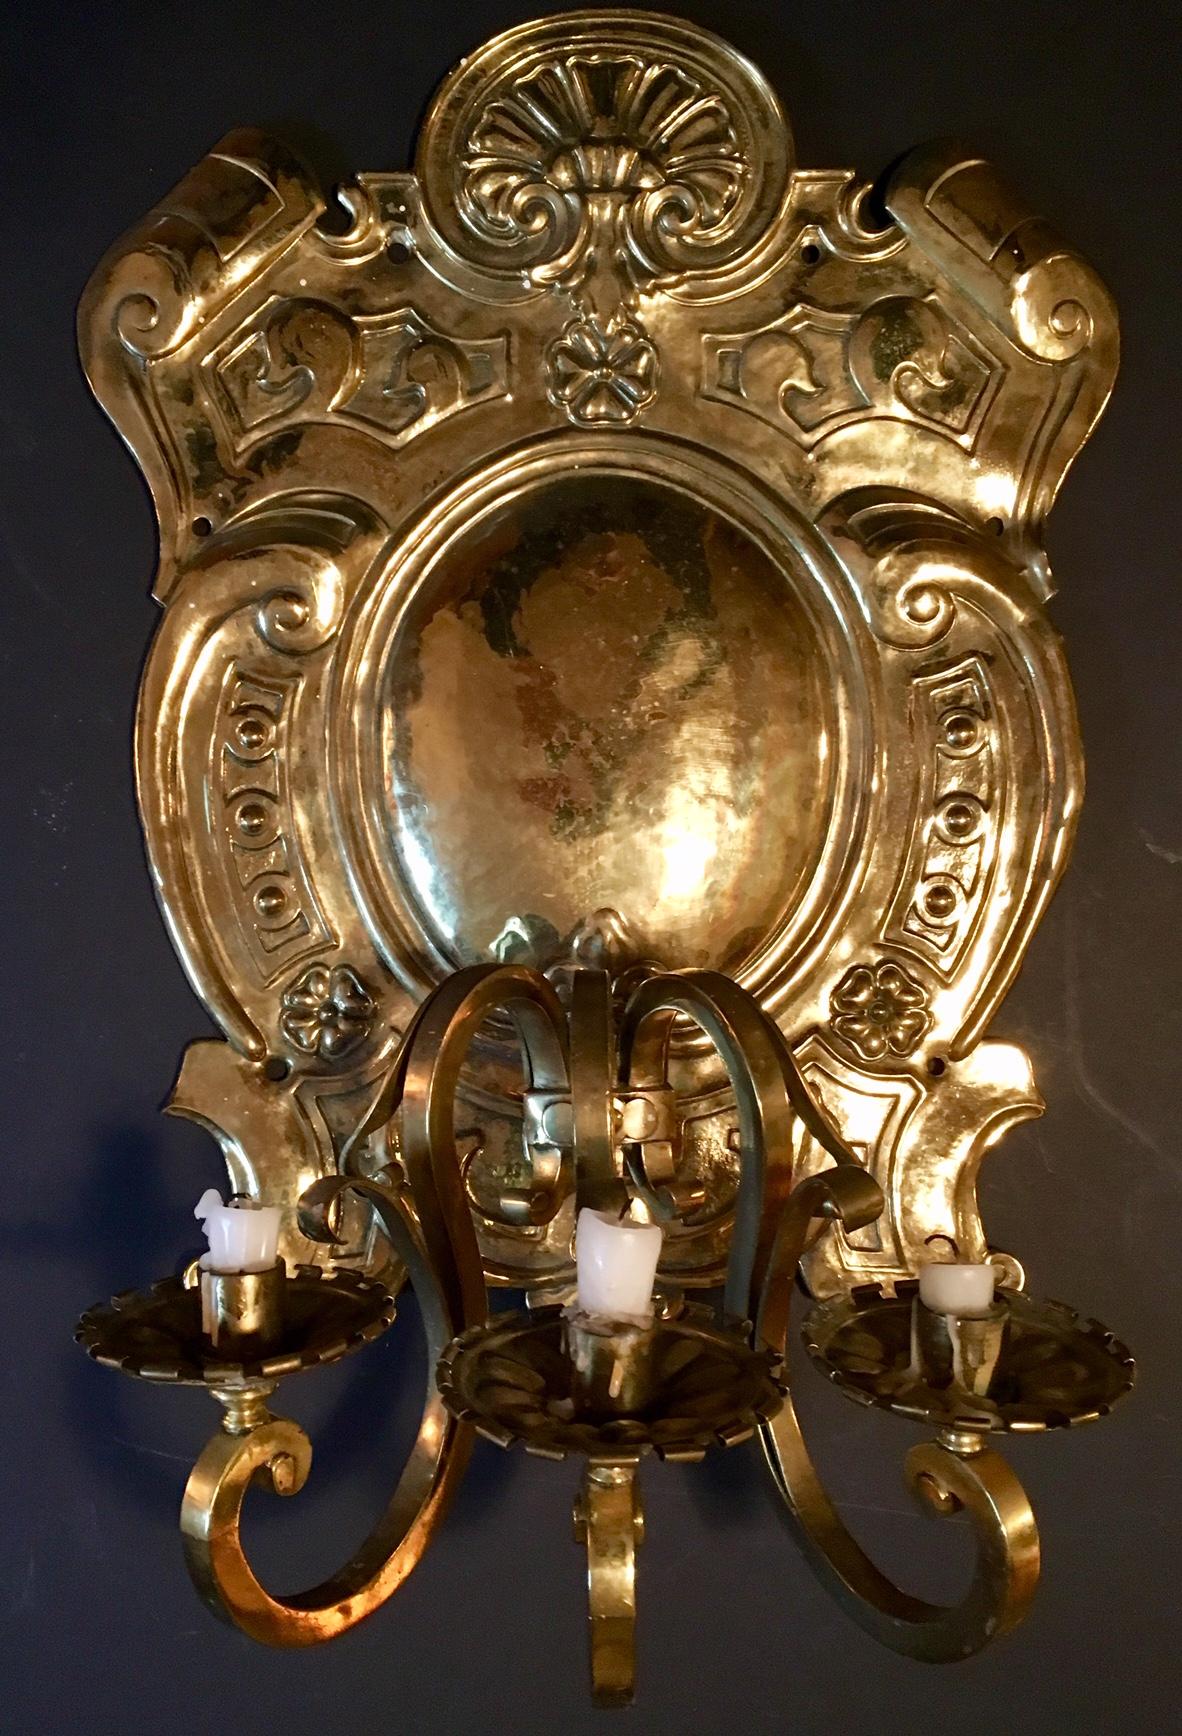 This is an impressively large and ornate antique repousse brass three-light sconce. The backplate is crest shaped with a convex center embossed with a shell and scroll design. The Dutch Baroque shaped candle arms are complete with cups and bobeches.